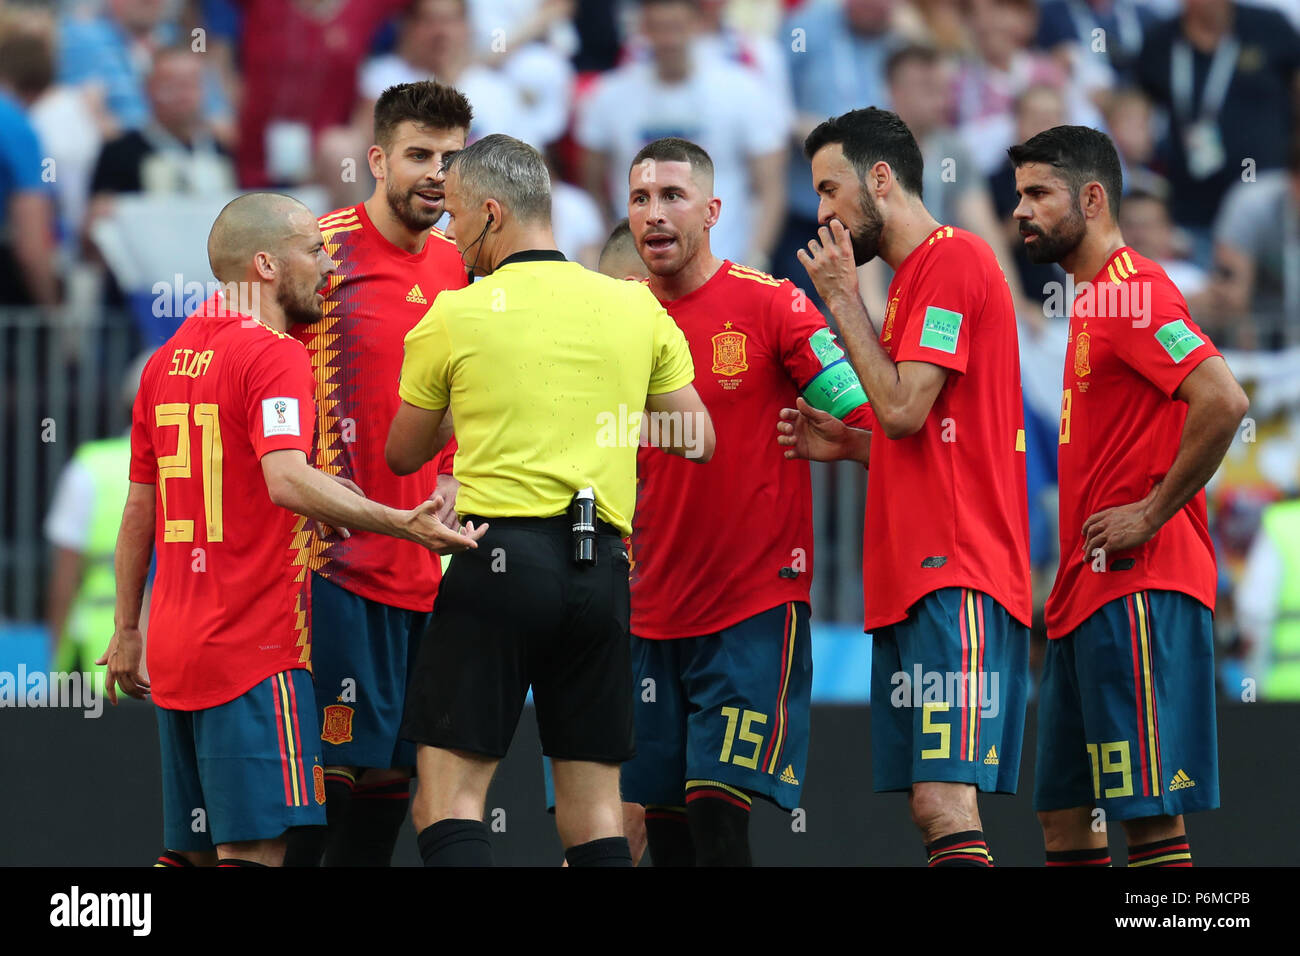 David Silva, Gerard Pique, Bjorn Kuipers, Sergio Ramos, Sergio Busquets, Diego Costa SPAIN V RUSSIA SPAIN V RUSSIA, 2018 FIFA WORLD CUP RUSSIA 01 July 2018 GBC9086 2018 FIFA World Cup Russia STRICTLY EDITORIAL USE ONLY. If The Player/Players Depicted In This Image Is/Are Playing For An English Club Or The England National Team. Then This Image May Only Be Used For Editorial Purposes. No Commercial Use. The Following Usages Are Also Restricted EVEN IF IN AN EDITORIAL CONTEXT: Use in conjuction with, or part of, any unauthorized audio, video, data, fixture lists, club/league lo Stock Photo